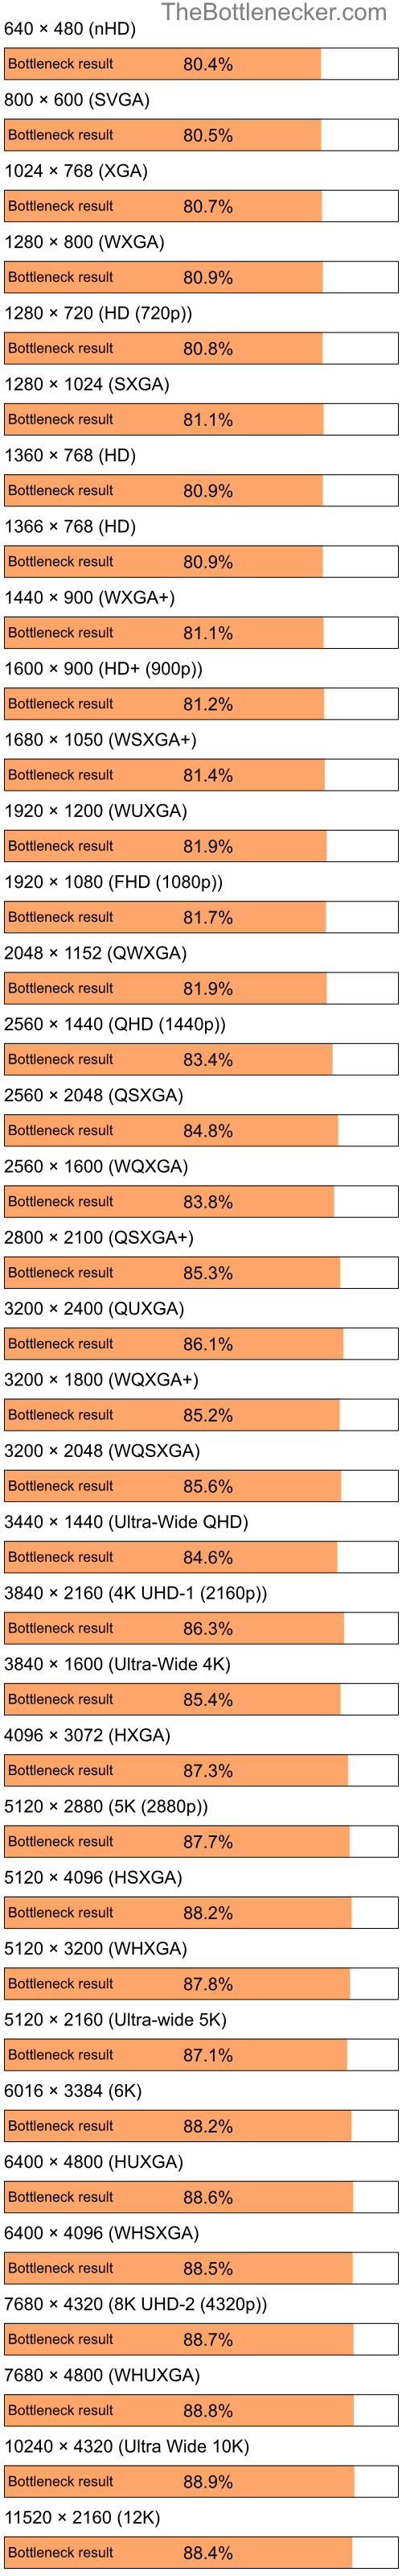 Bottleneck results by resolution for Intel Celeron and NVIDIA GeForce 6200 in Graphic Card Intense Tasks